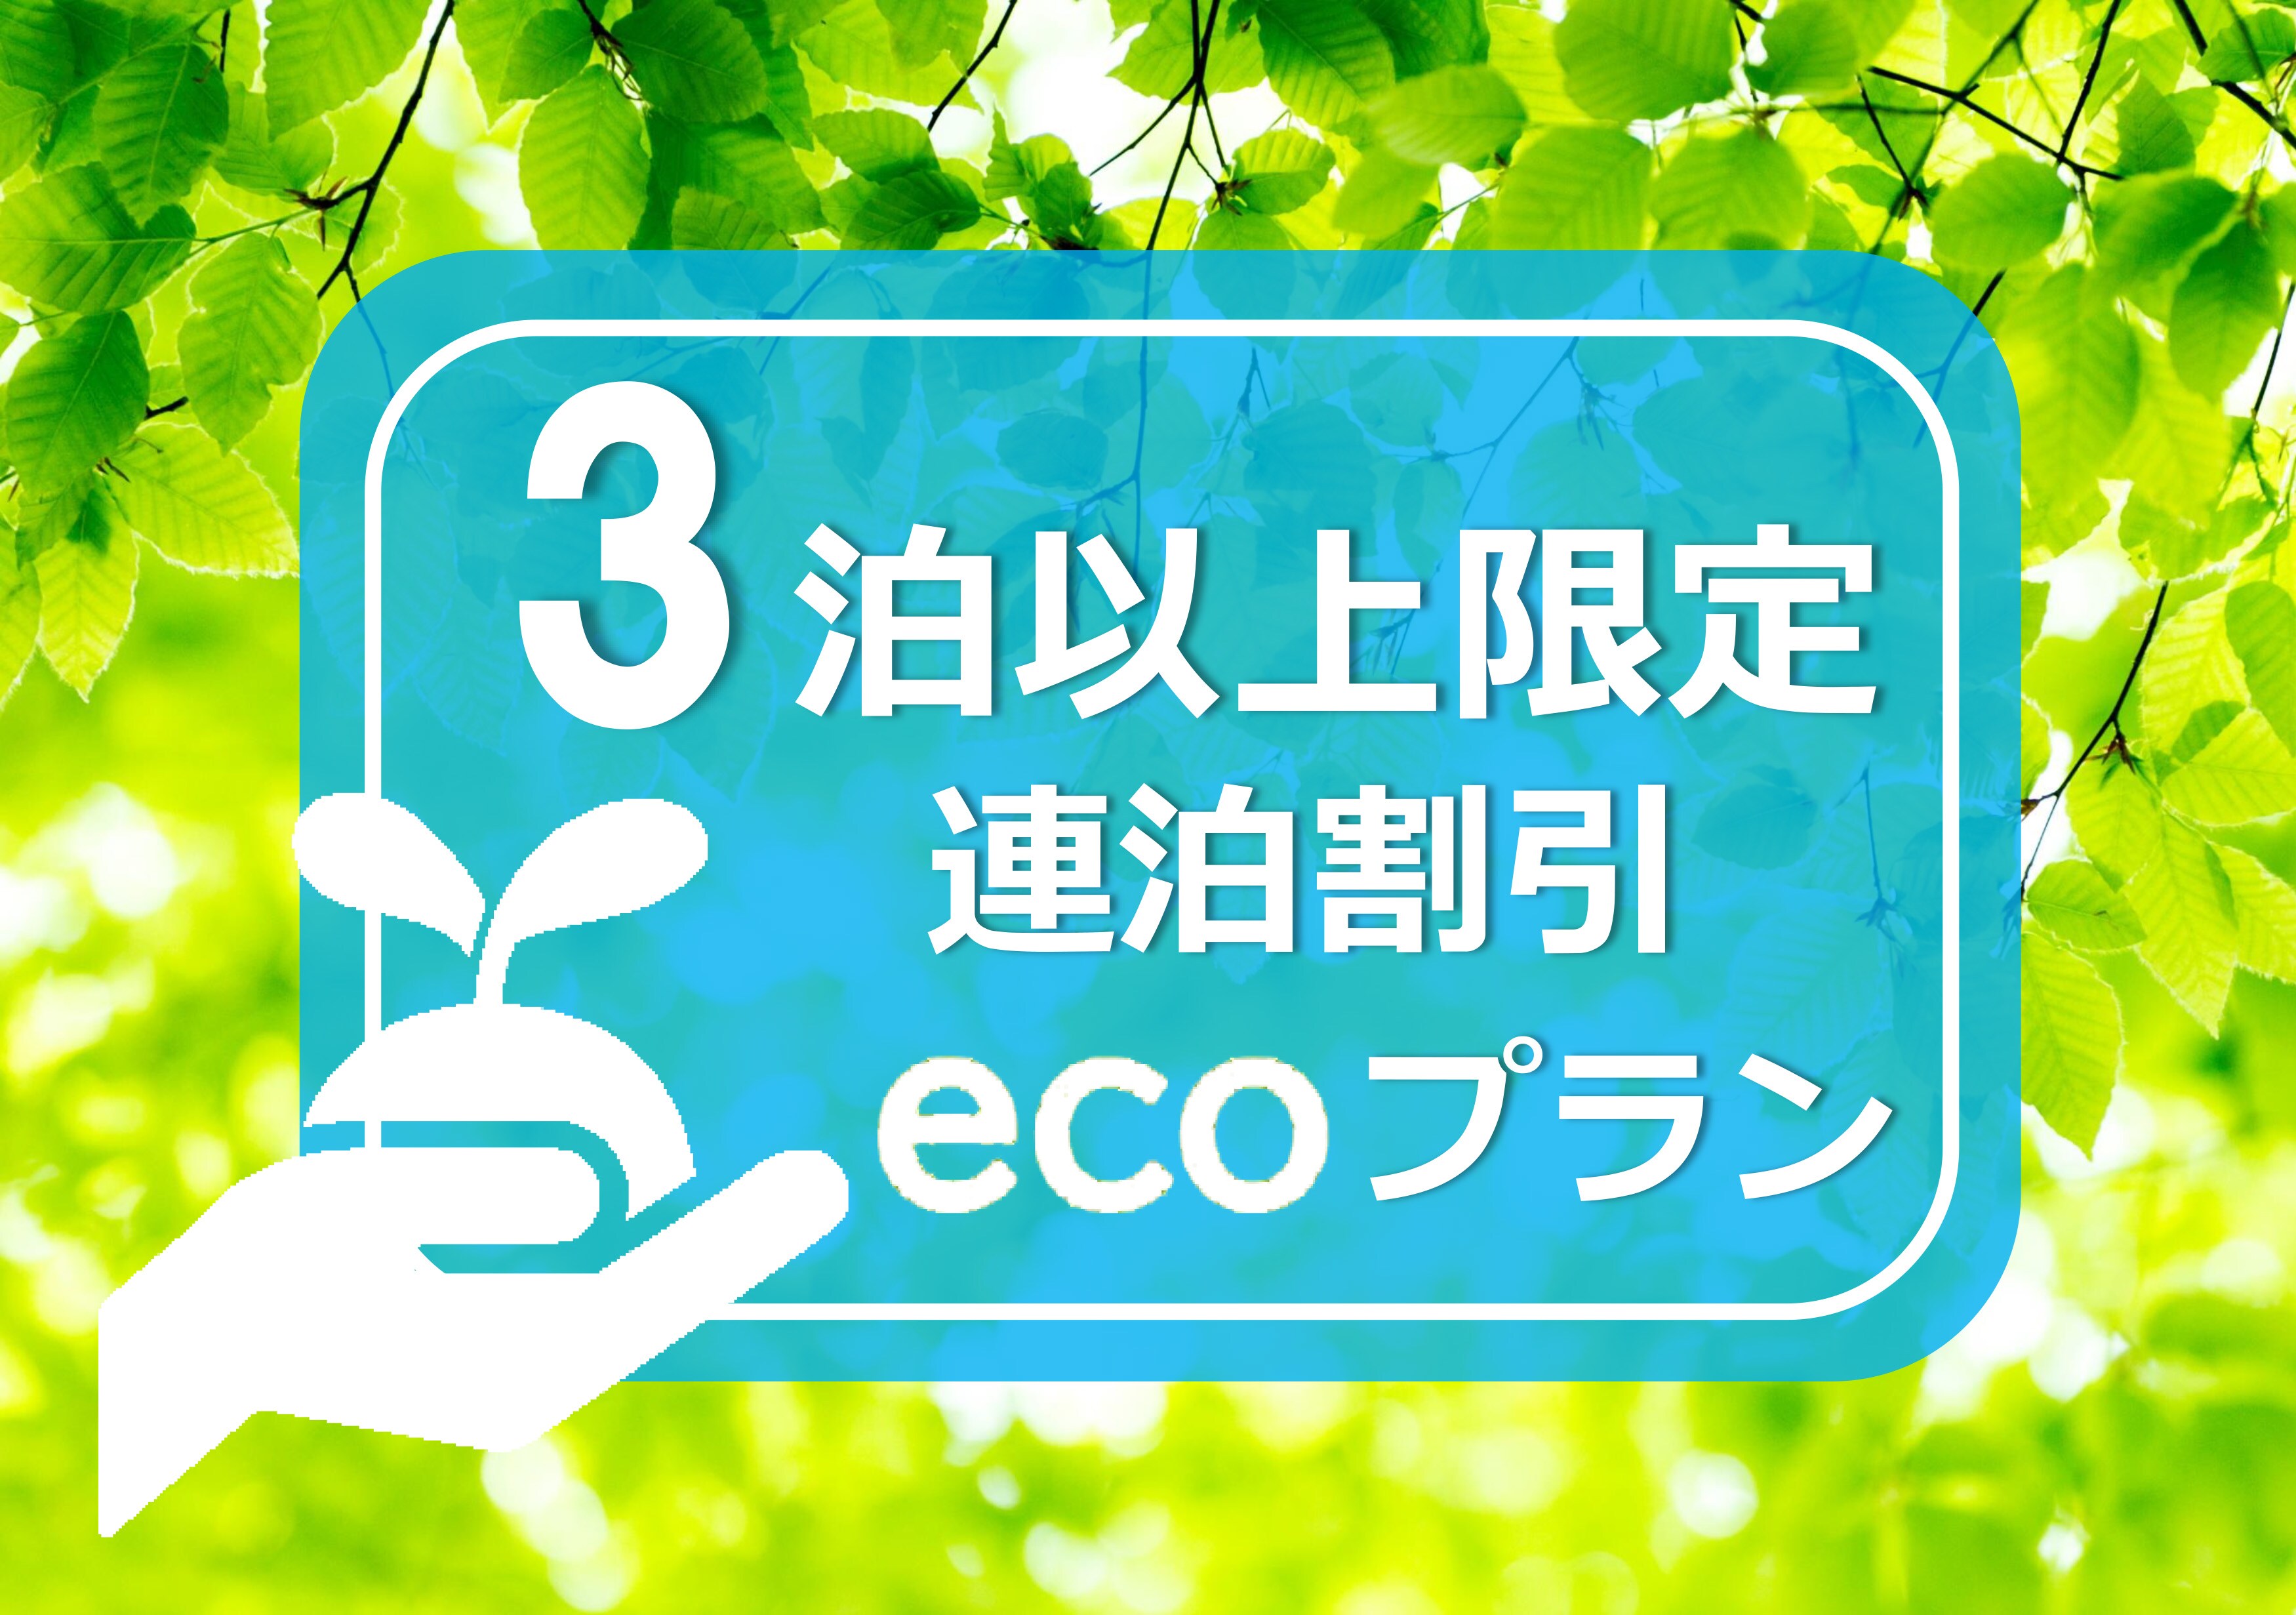 Eco 3 nights without meals